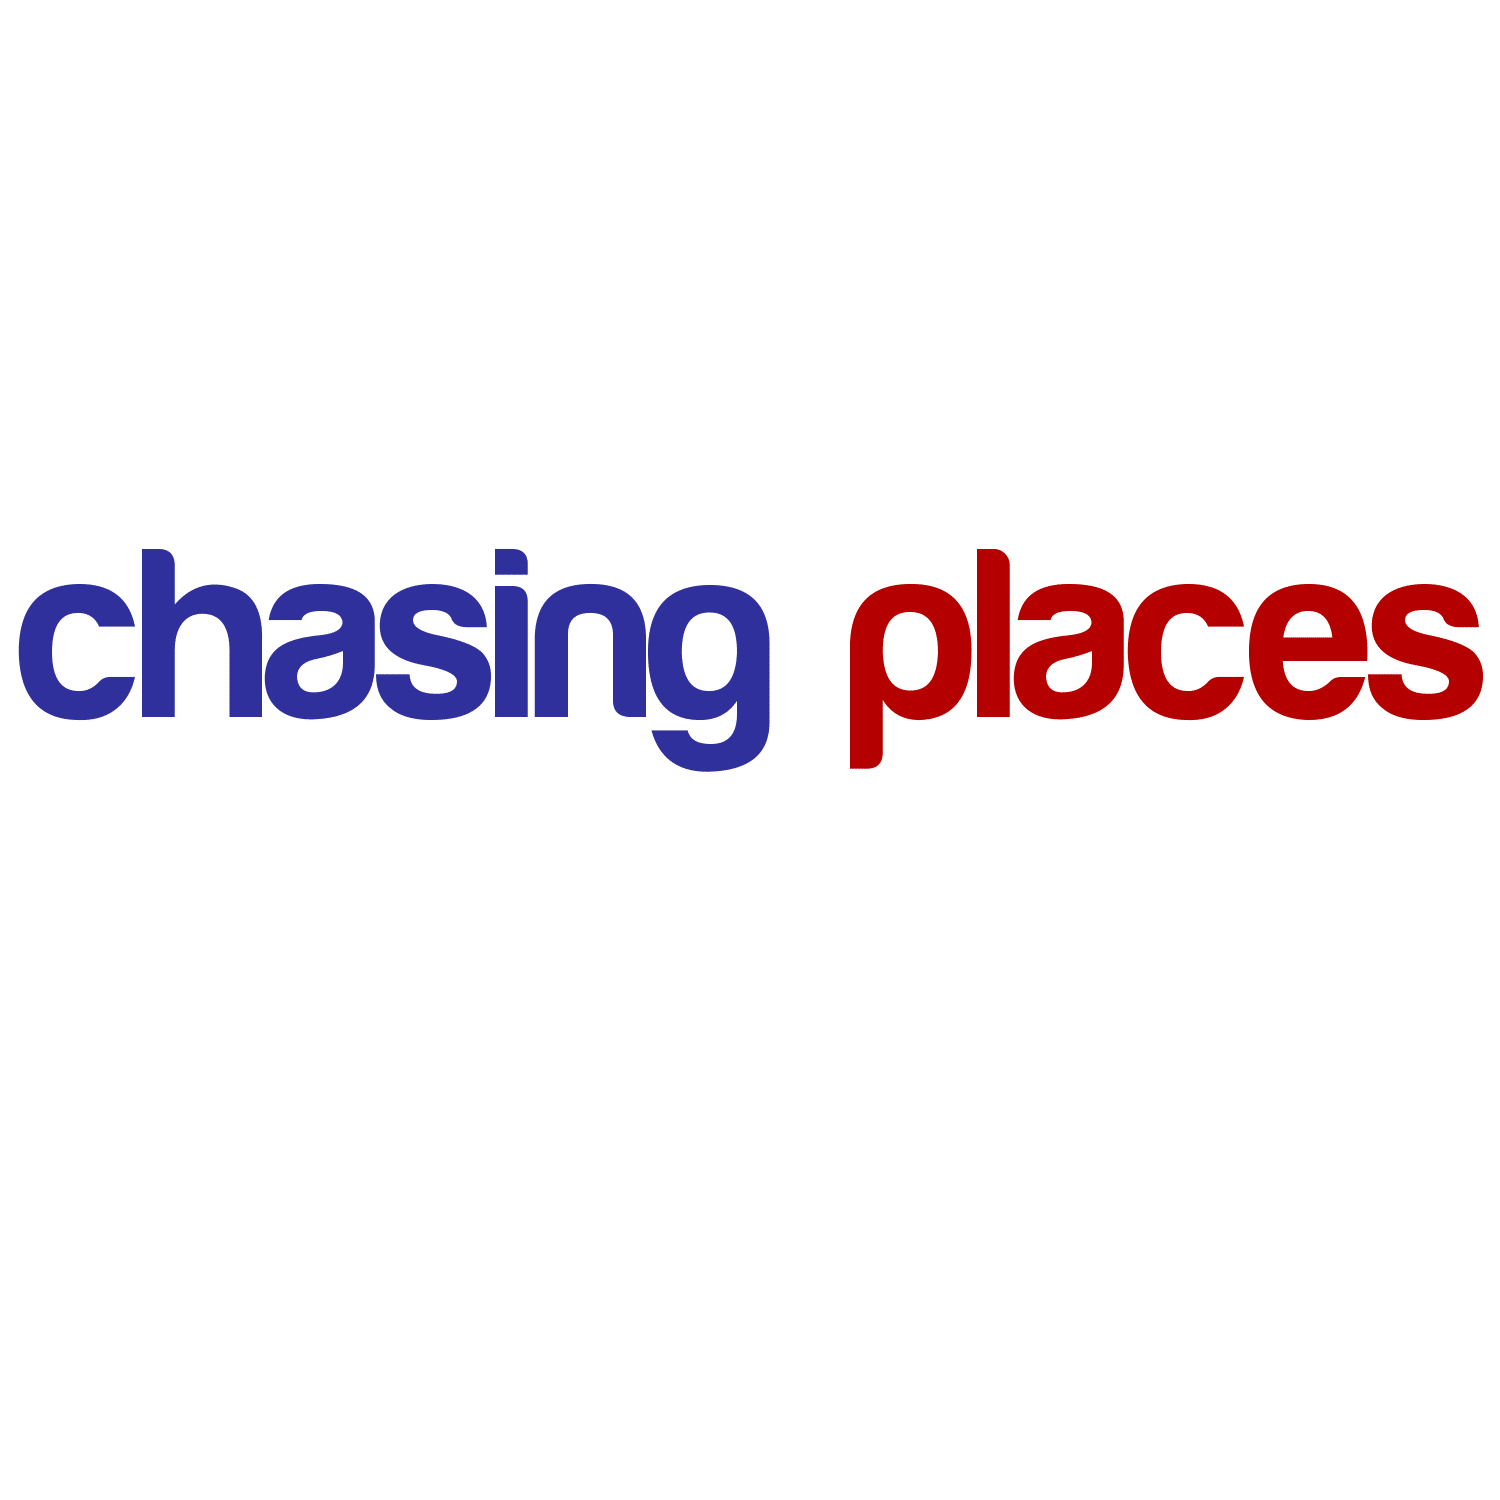 Chasing Logo - Chasing PLaces Logo 1500x1500 | Chasing Places Travel Guide